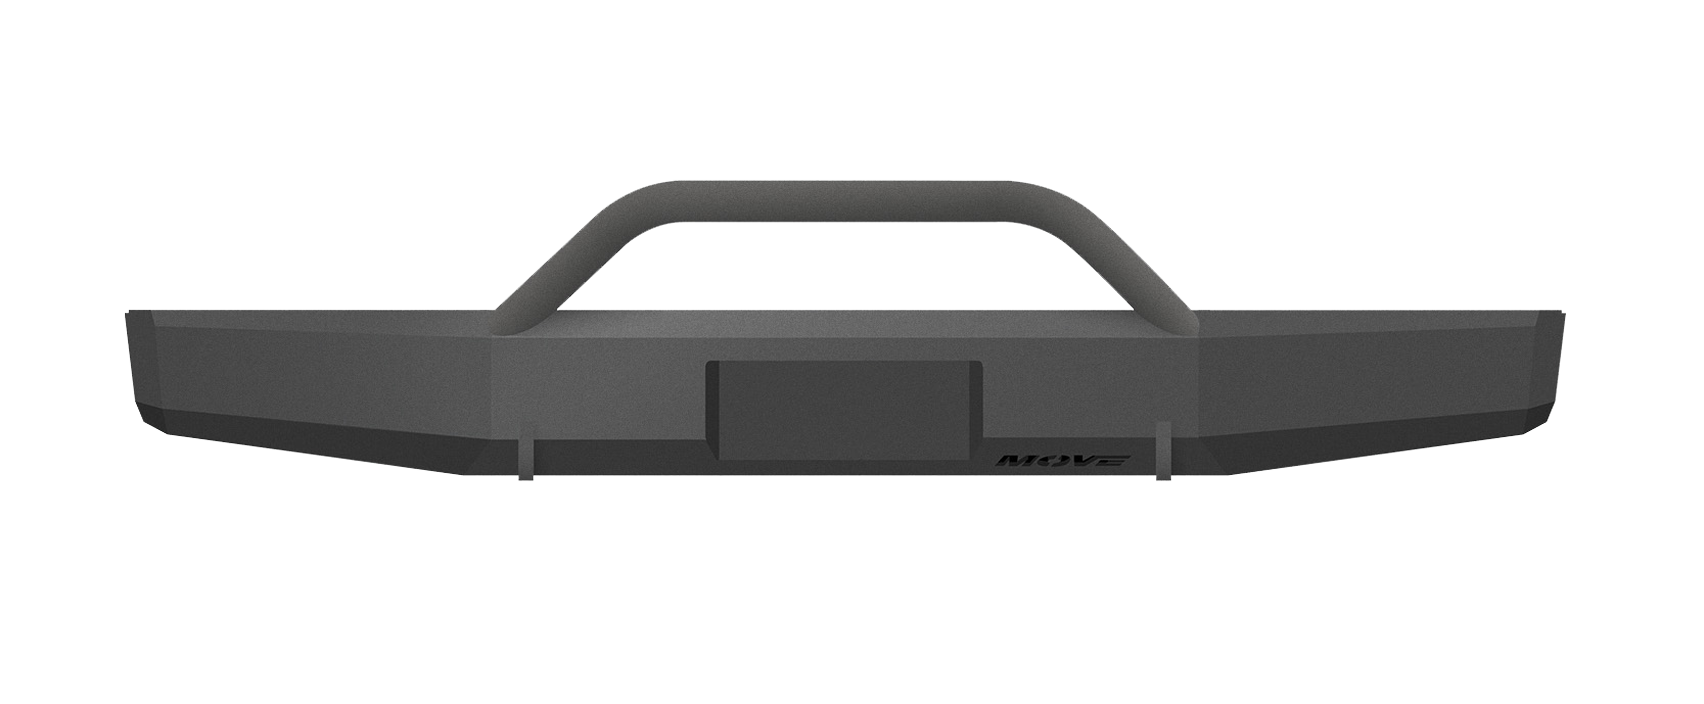 Heritage Bull Bar Front Truck Bumper - 2.5" Bull Bar - MOVE Bumpers  | contain